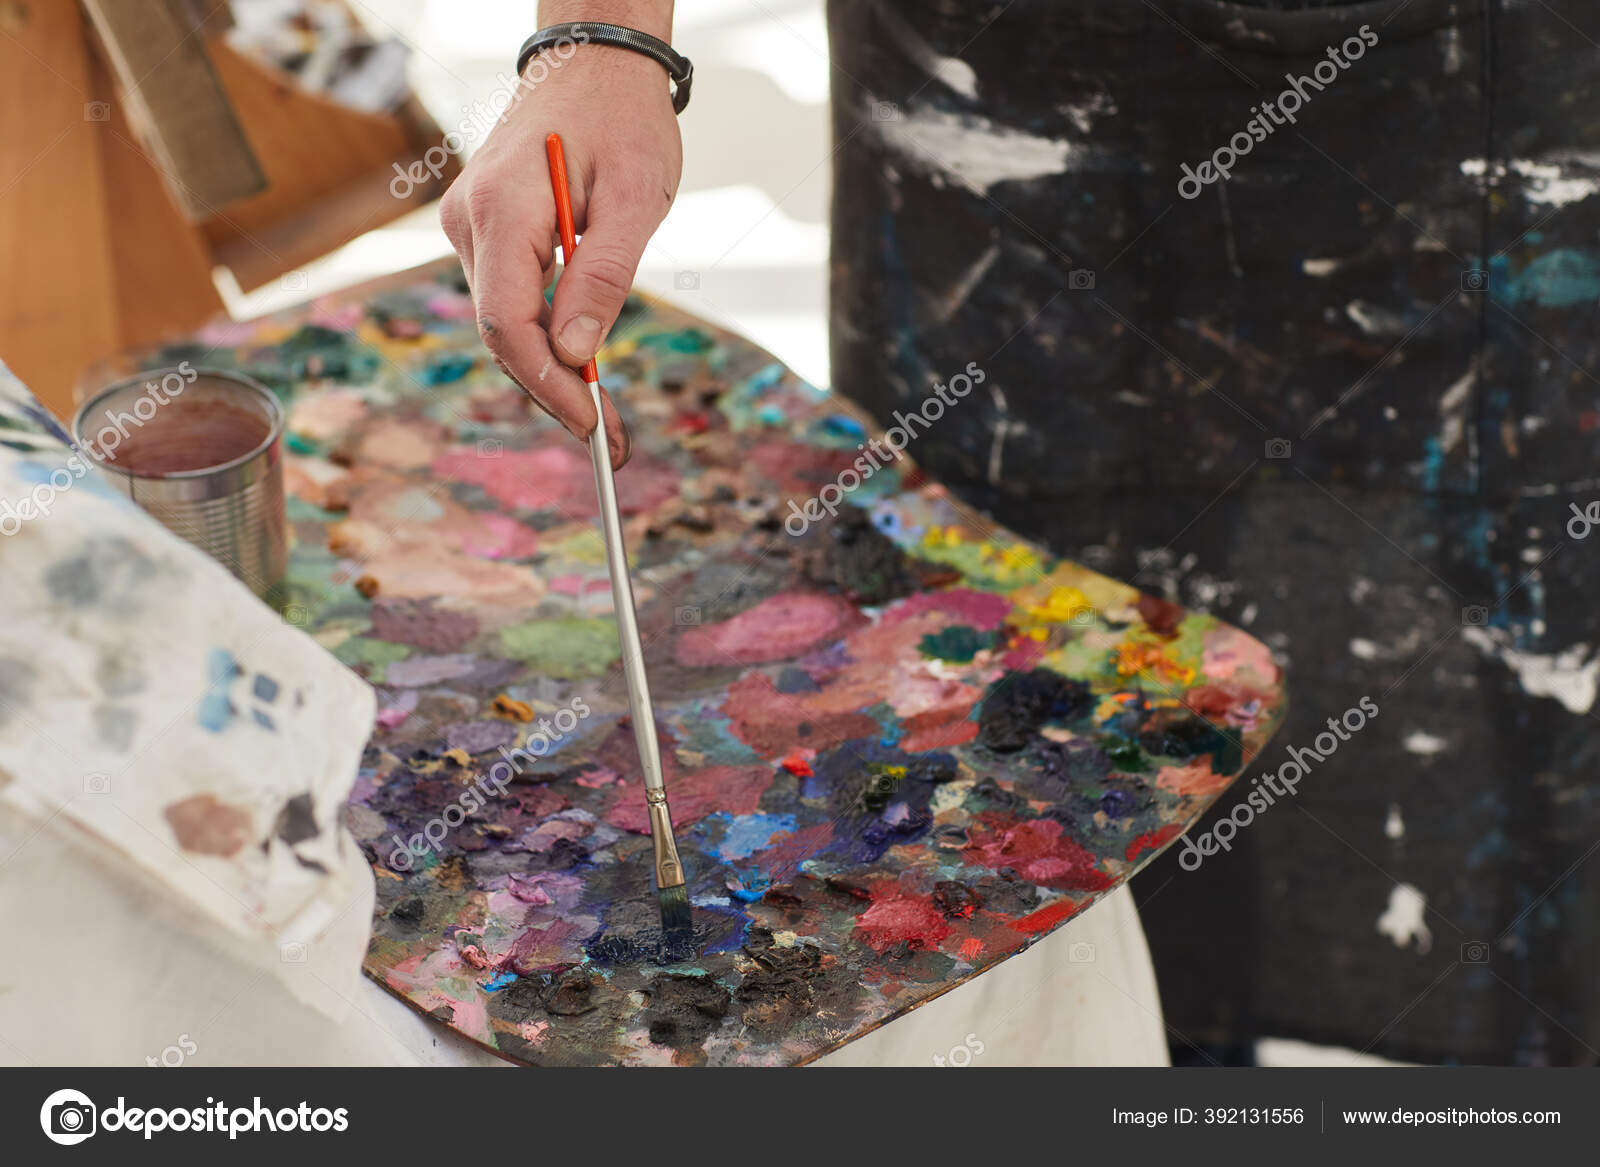 The Mini Painting Palette